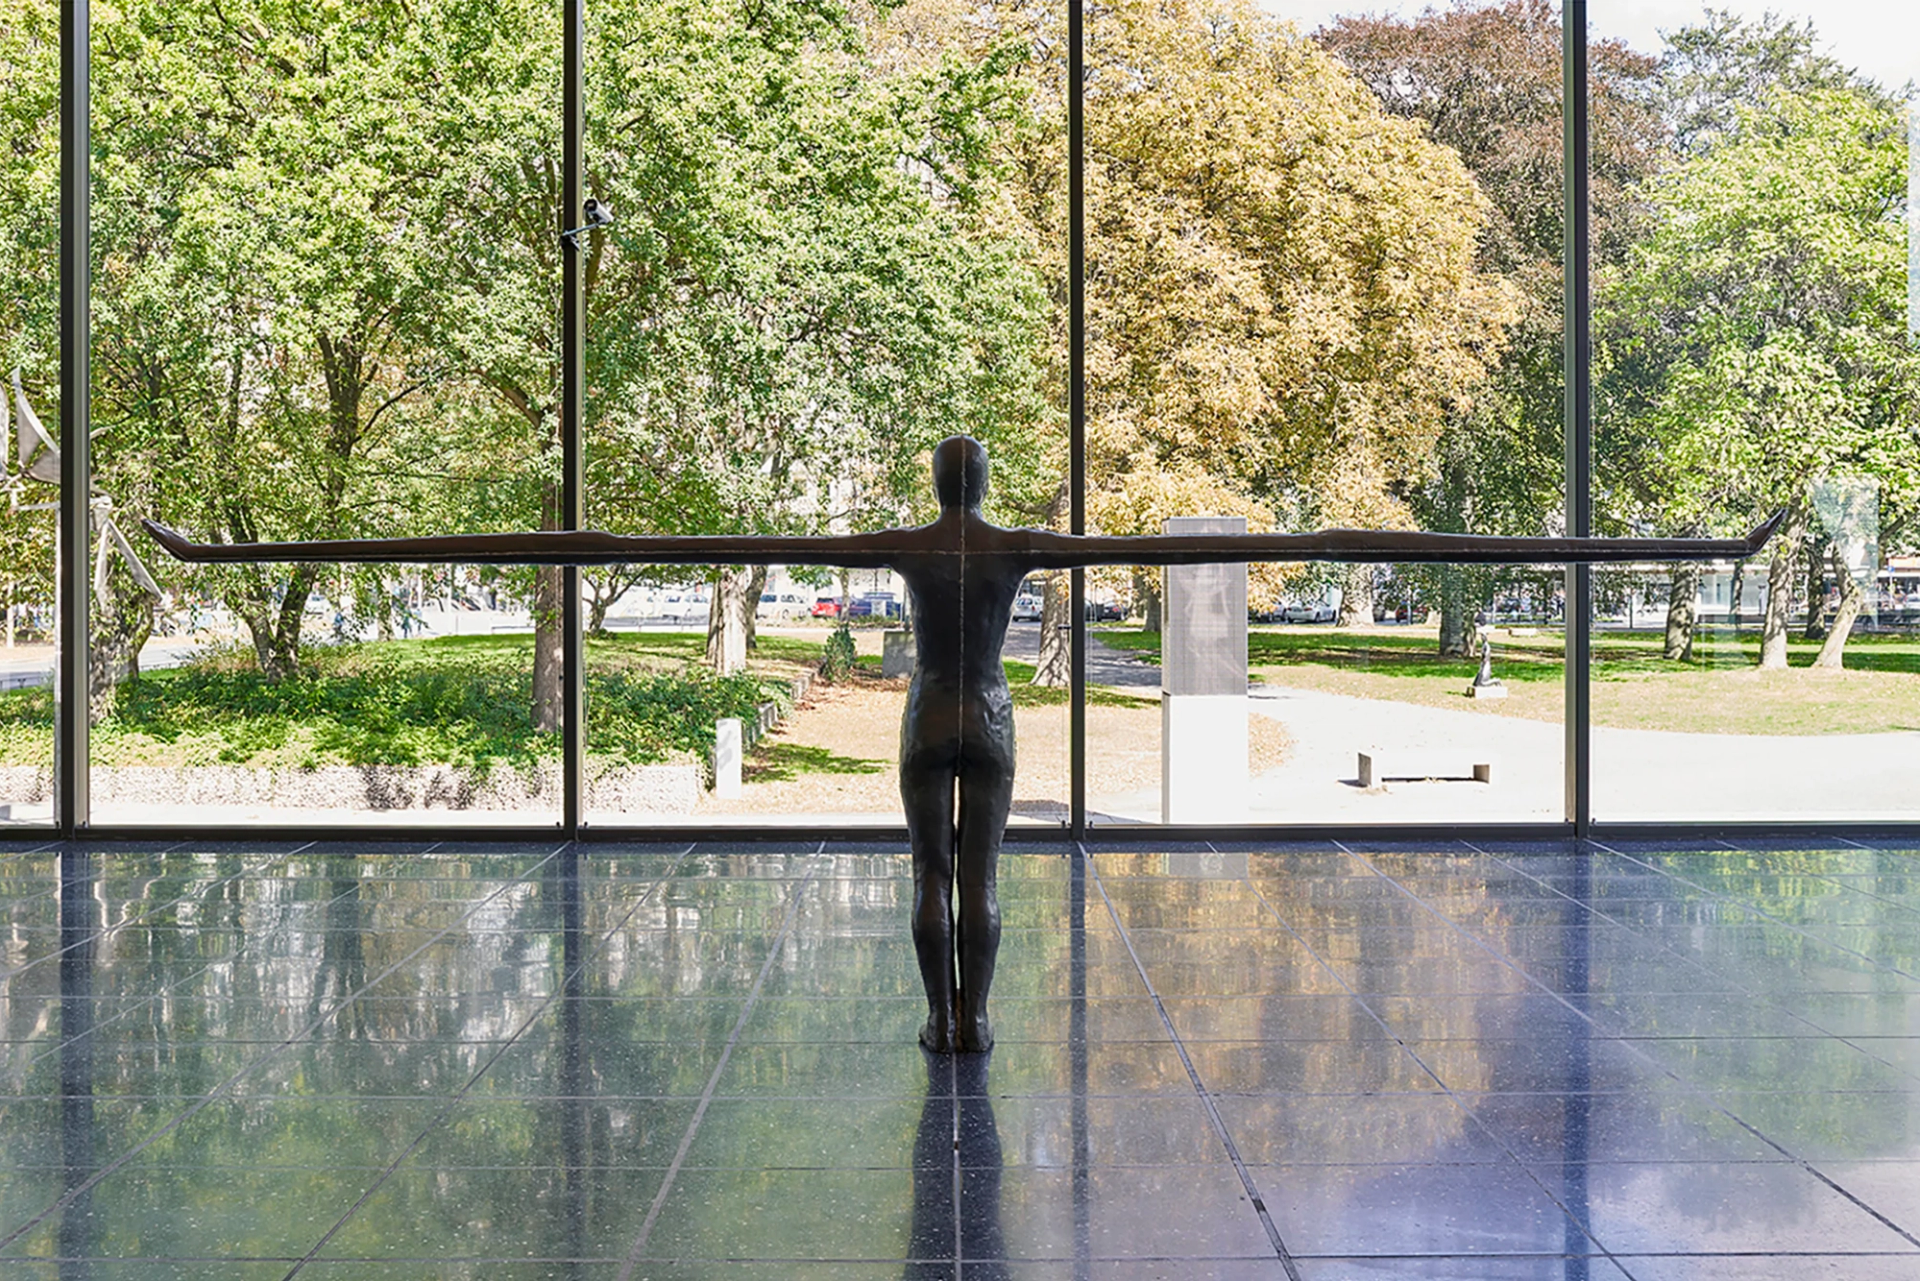 A photograph showing the back view of a sculpture representing the human figure. The figure stands firmly with its feet grounded while being supported by an imposing wingspan. The knees are slightly bent, adding to the sense of balance and stability. The sculpture is captured from behind, highlighting its dynamic form and captured in a pristine gallery space. The gallery features large glass windows that offer a glimpse of the surrounding trees outside, creating a harmonious connection between the artwork and nature.